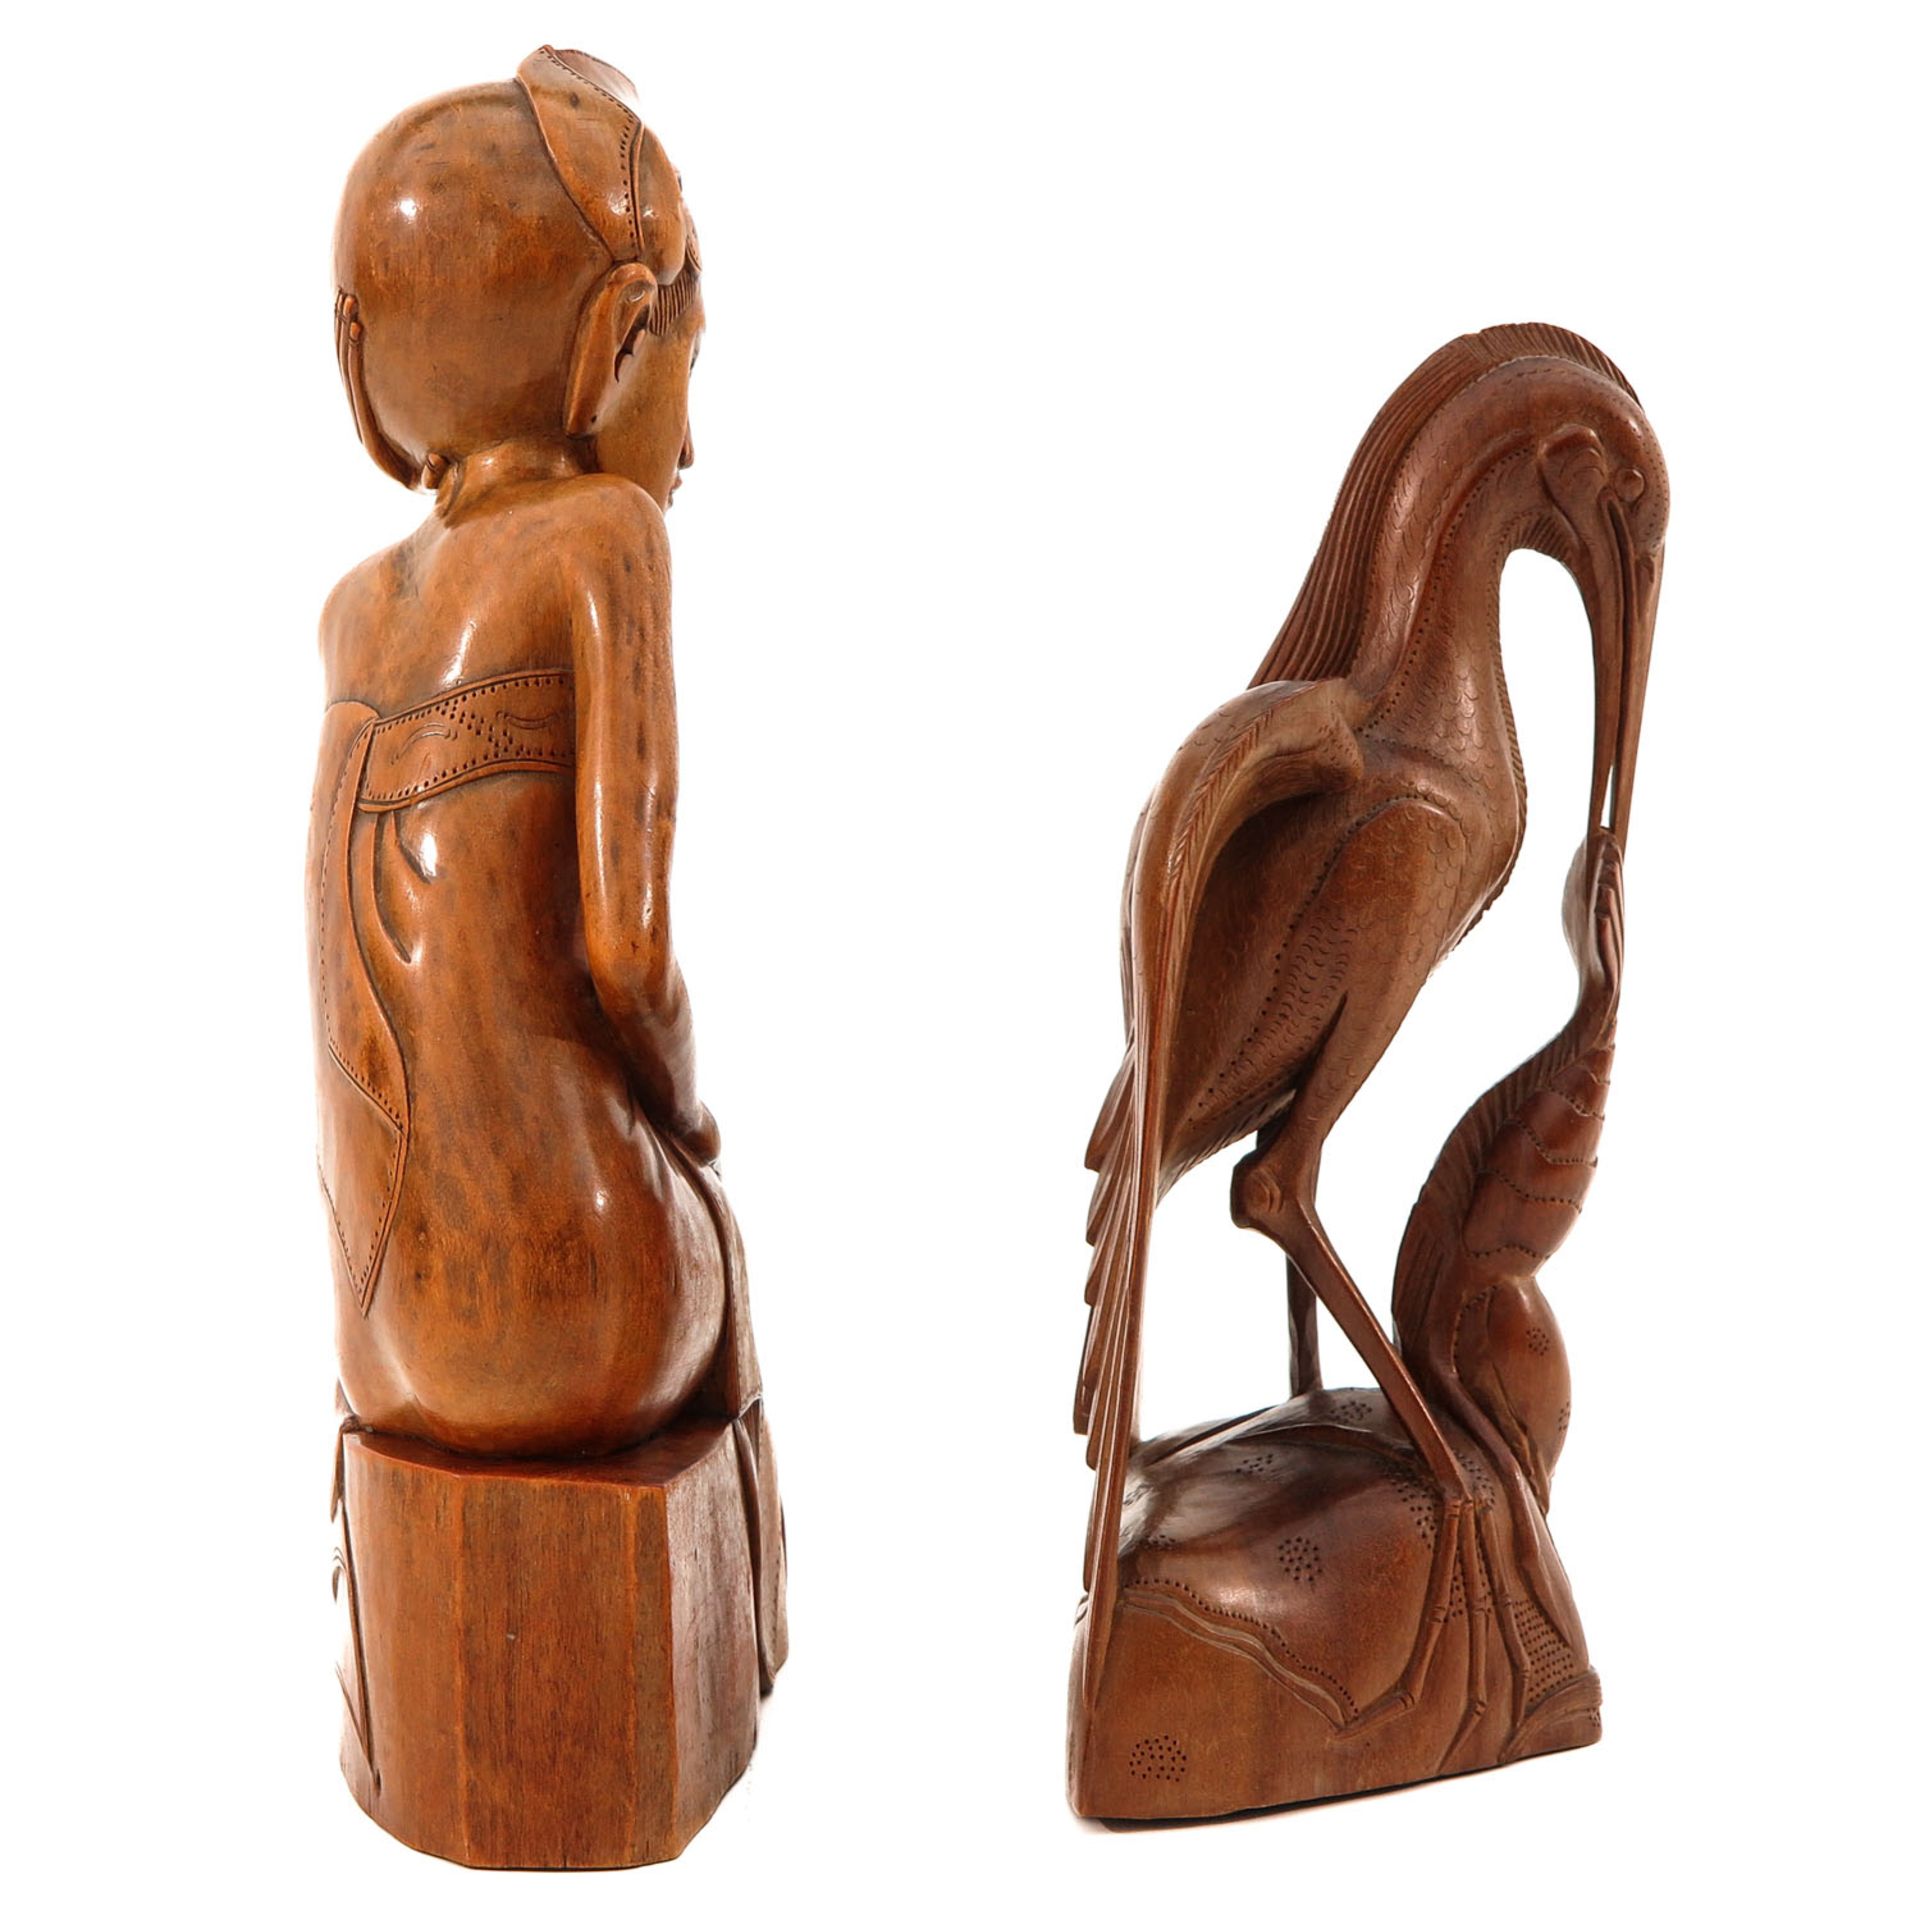 A Lot of 2 Carved Wood Sculptures - Image 4 of 10